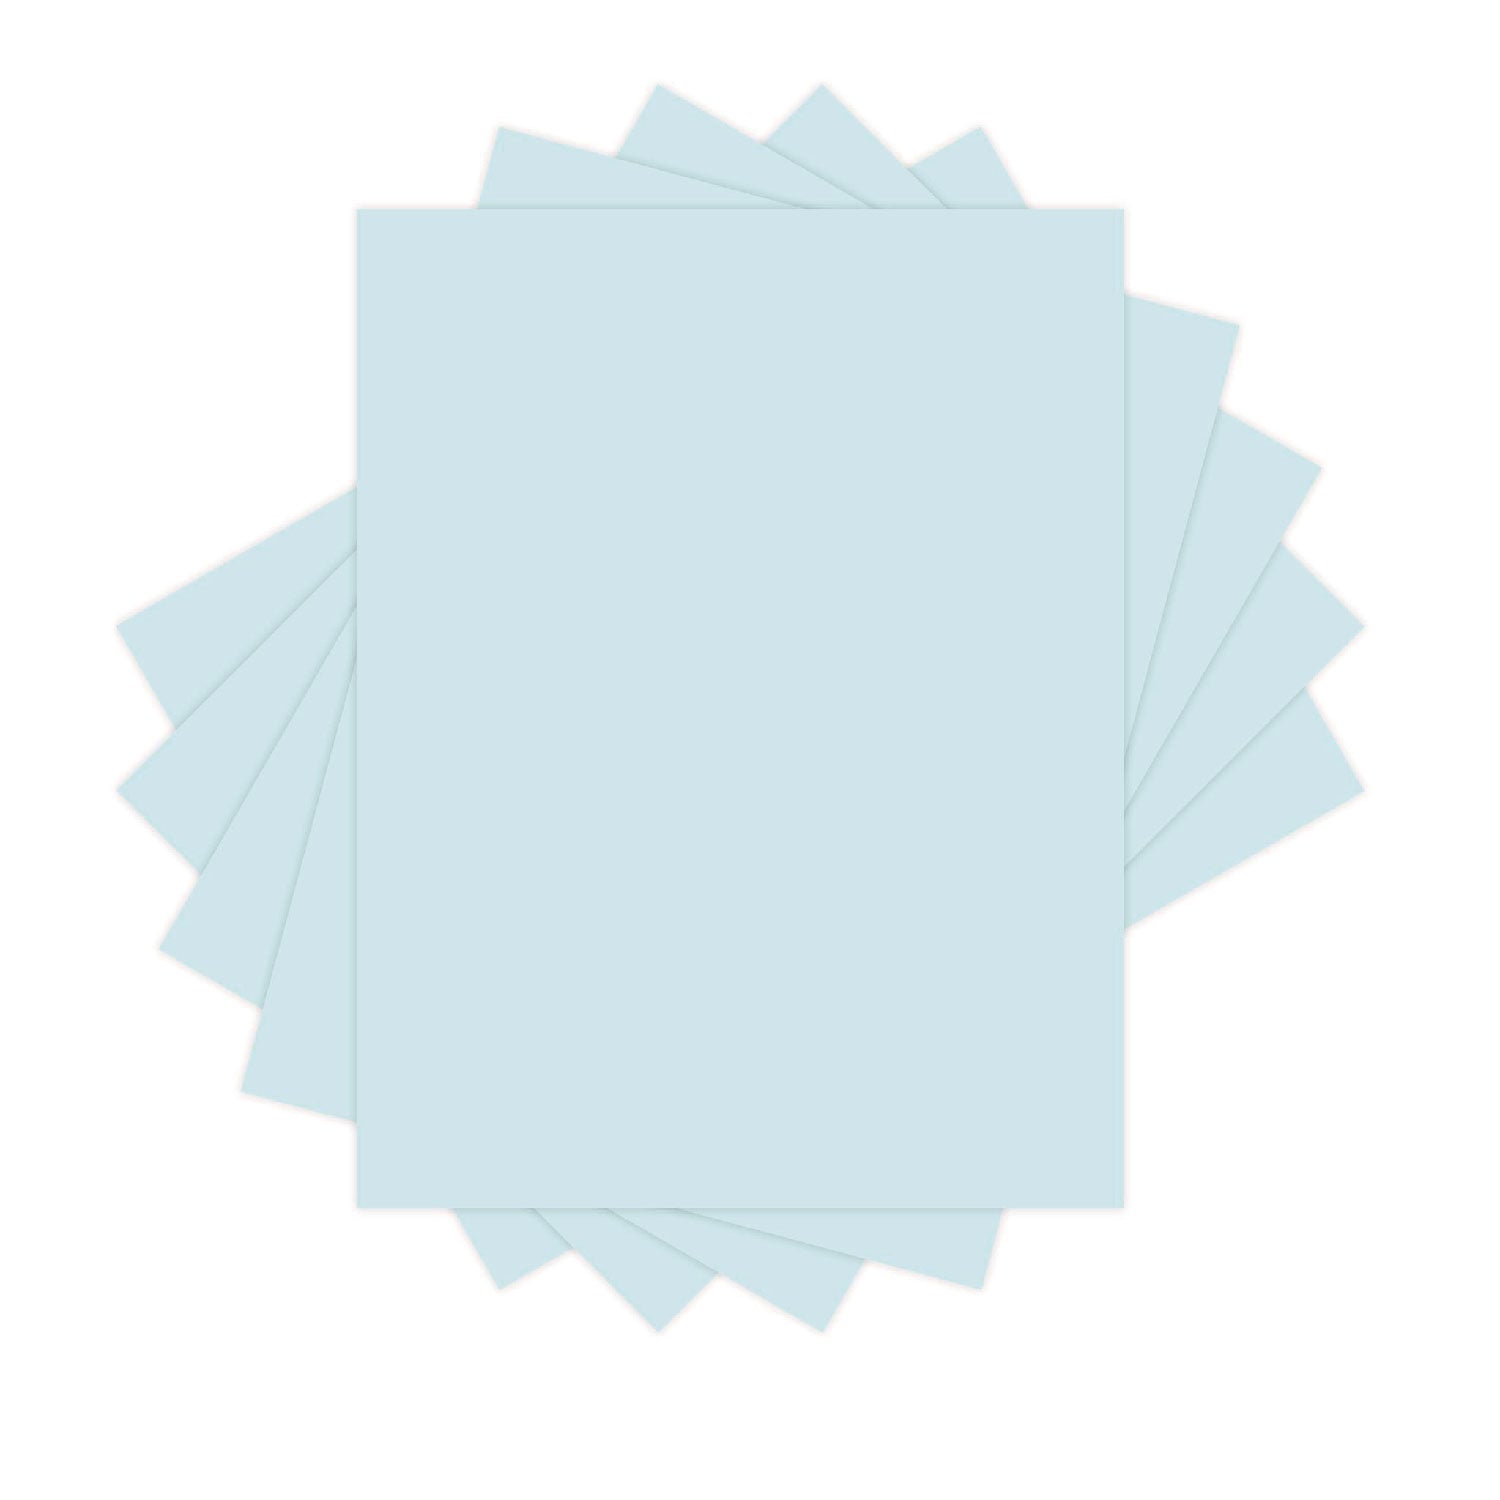 30% Recycled Colored Paper, 20 lb Bond Weight, 8.5 x 11, Blue, 500/Ream - 2